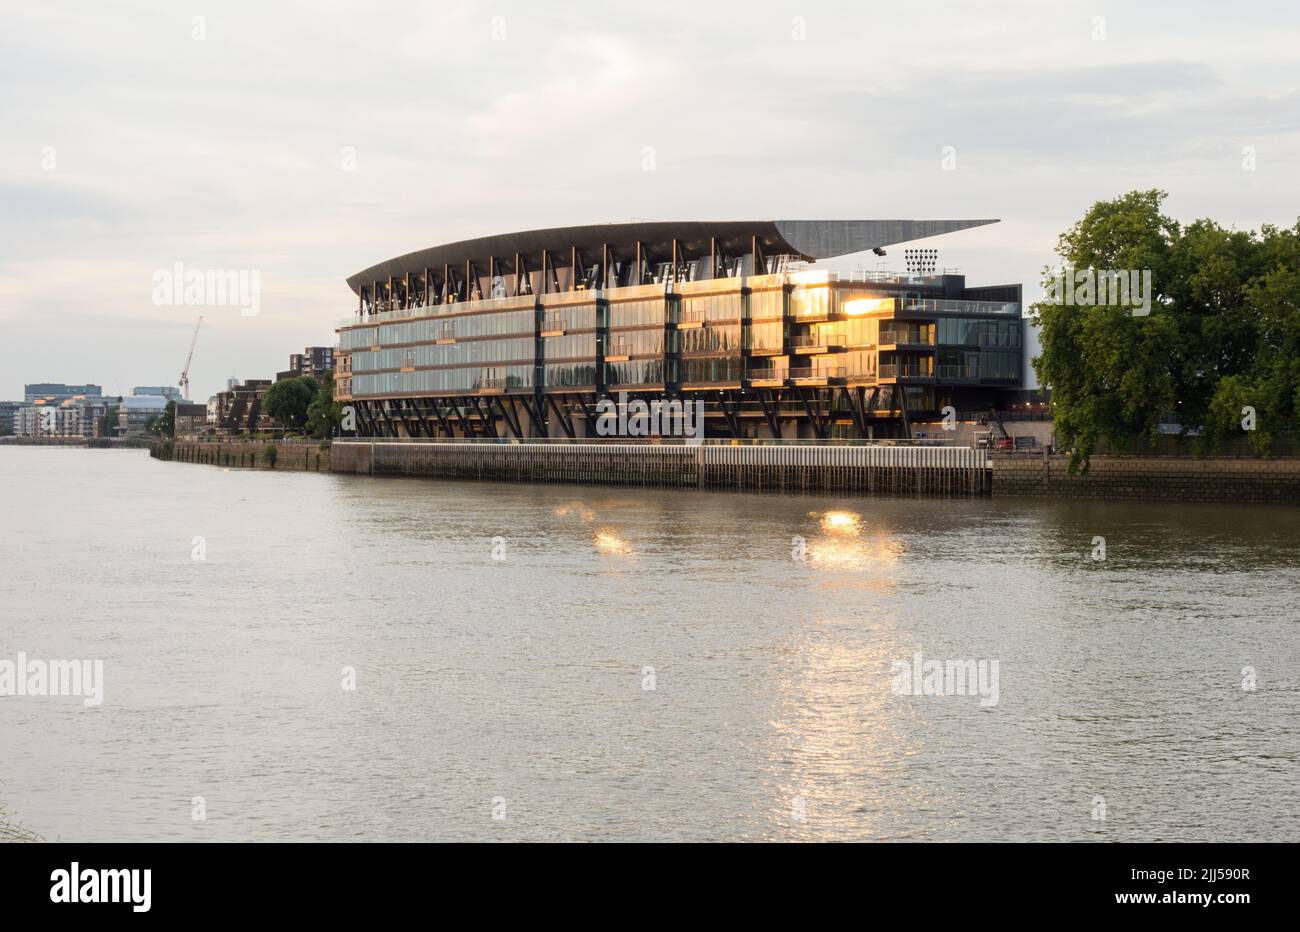 Fulham Football Club's new Riverside Stand on the banks of the River Thames in southwest London, England, U.K. Stock Photo